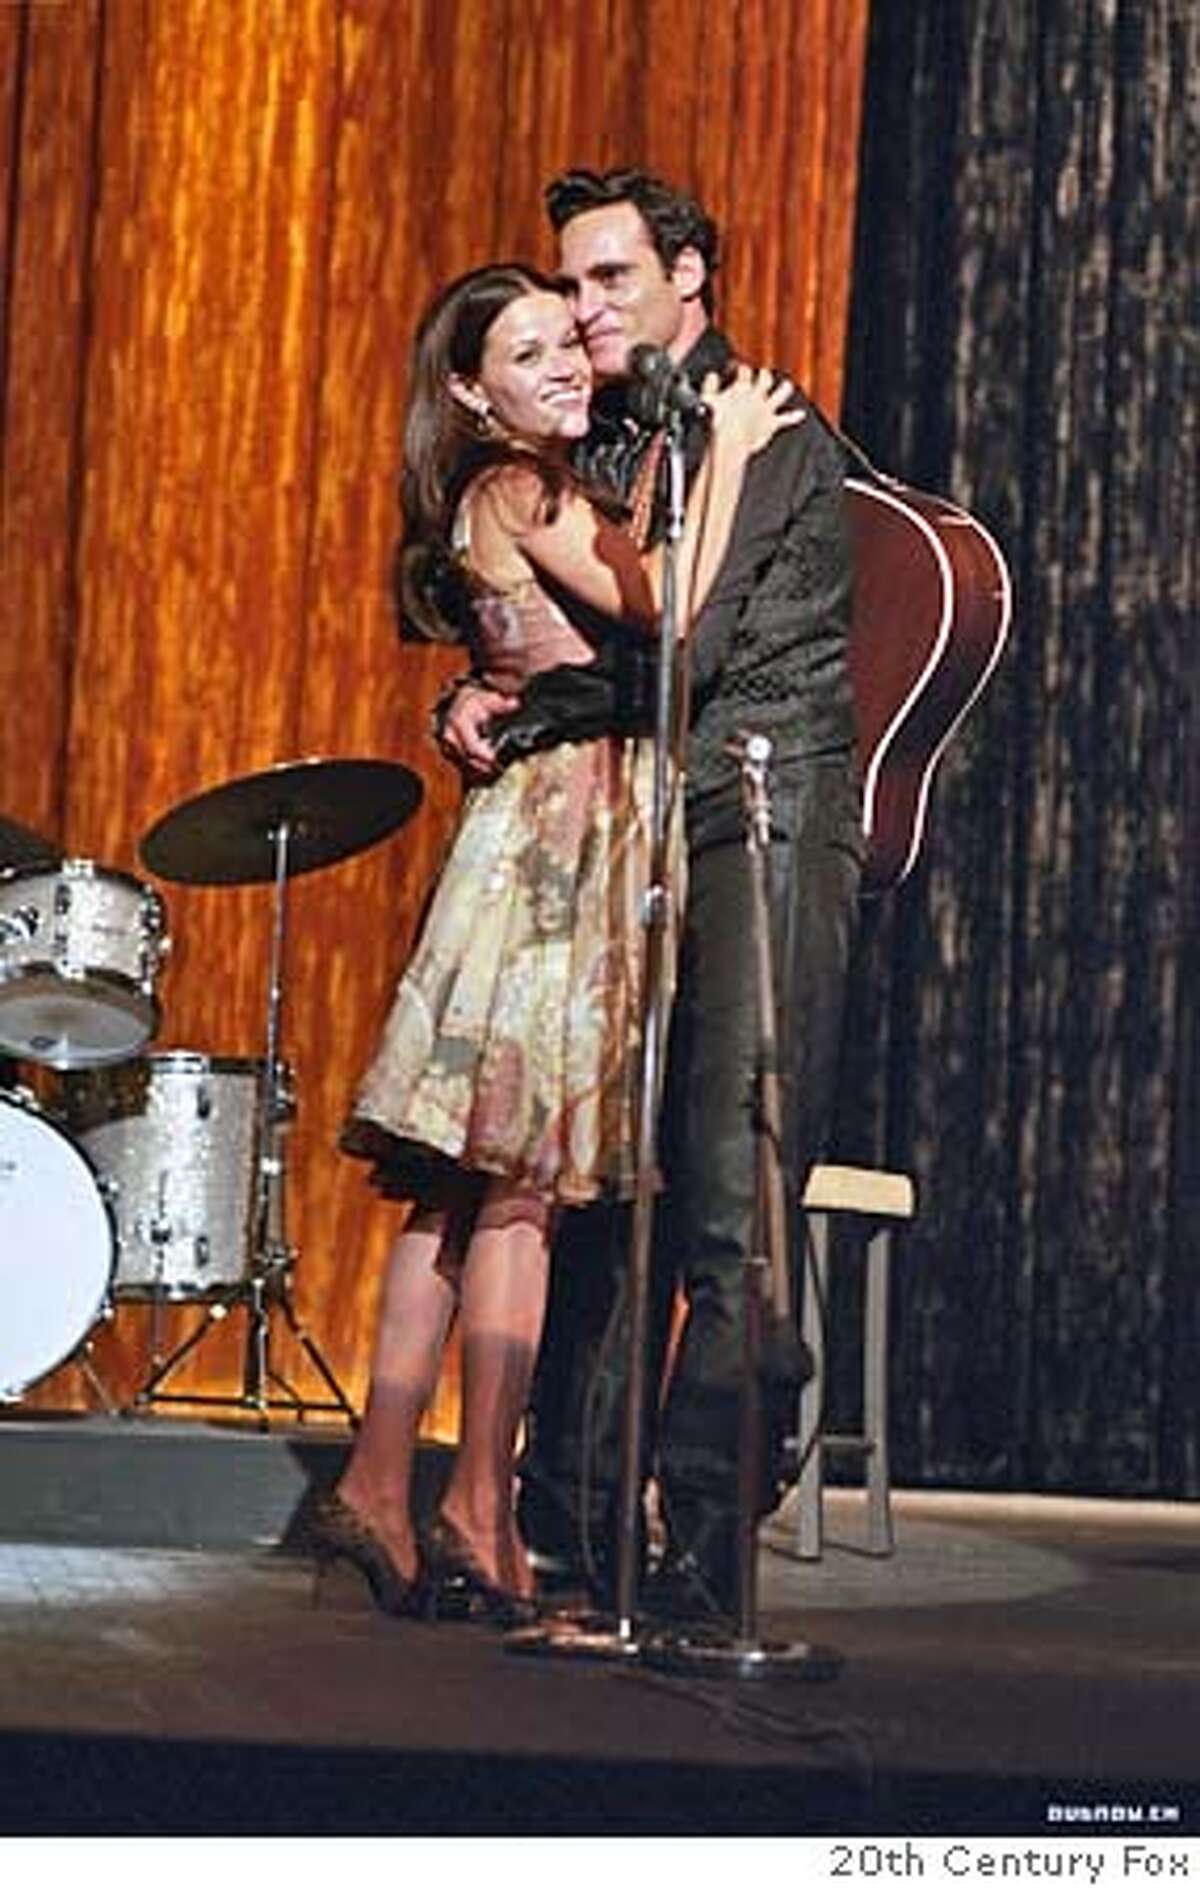 Reese Witherspoon and Joaquin Phoenix in "Walk the Line" 2005 Johnny Cash biopic. Reese plays June Carter Cash Ran on: 11-13-2005 Reese Witherspoon and Joaquin Phoenix in Walk the Line. Ran on: 12-02-2005 This years contenders may include (clockwise from left) David Strathairn, Reese Witherspoon, Joaquin Phoenix, George Clooney, Ed Harris and Claire Danes.